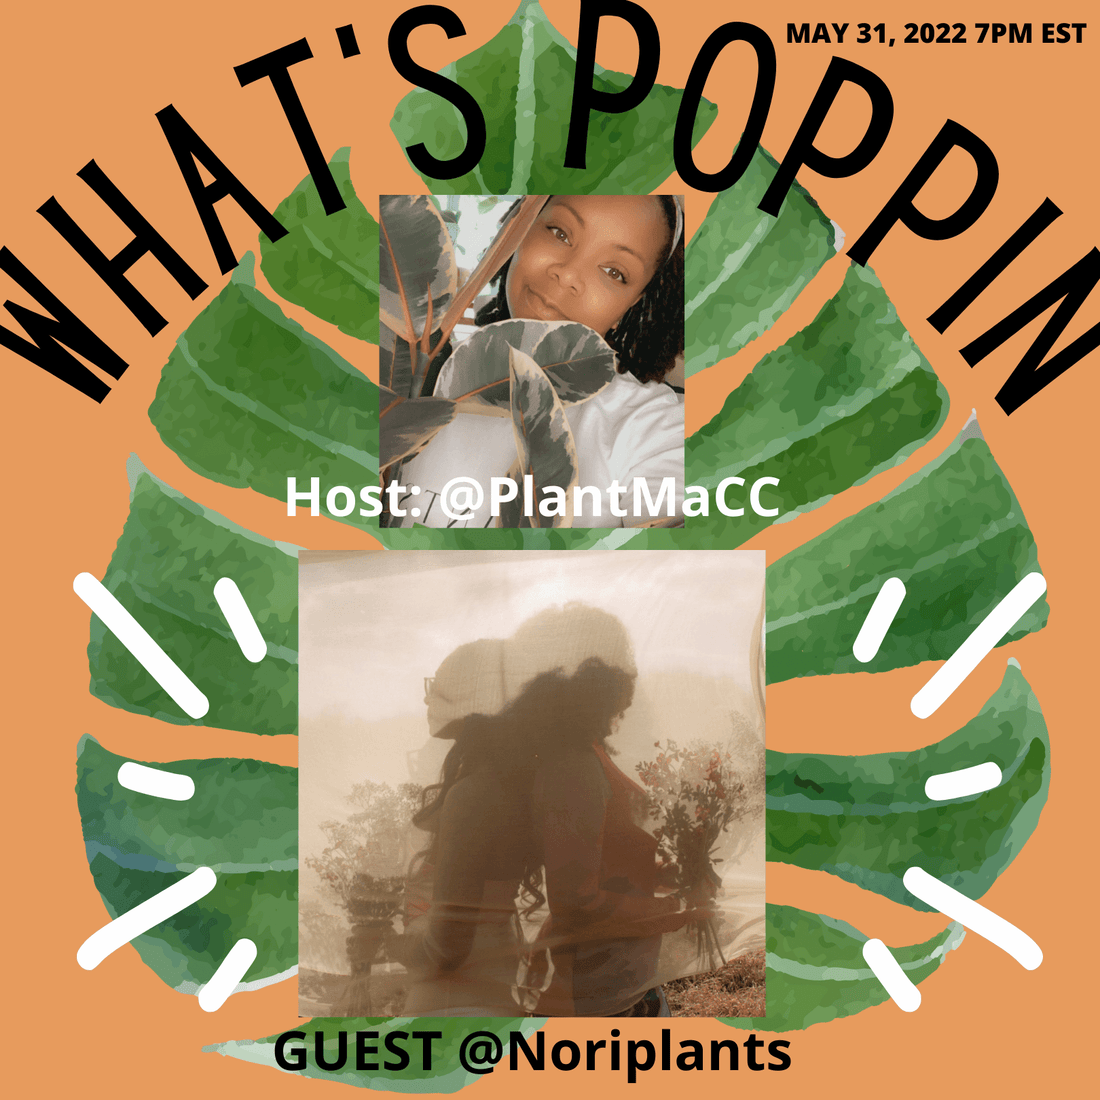 WHAT'S POPPIN- EPISODE 14 - The Leafy Branch